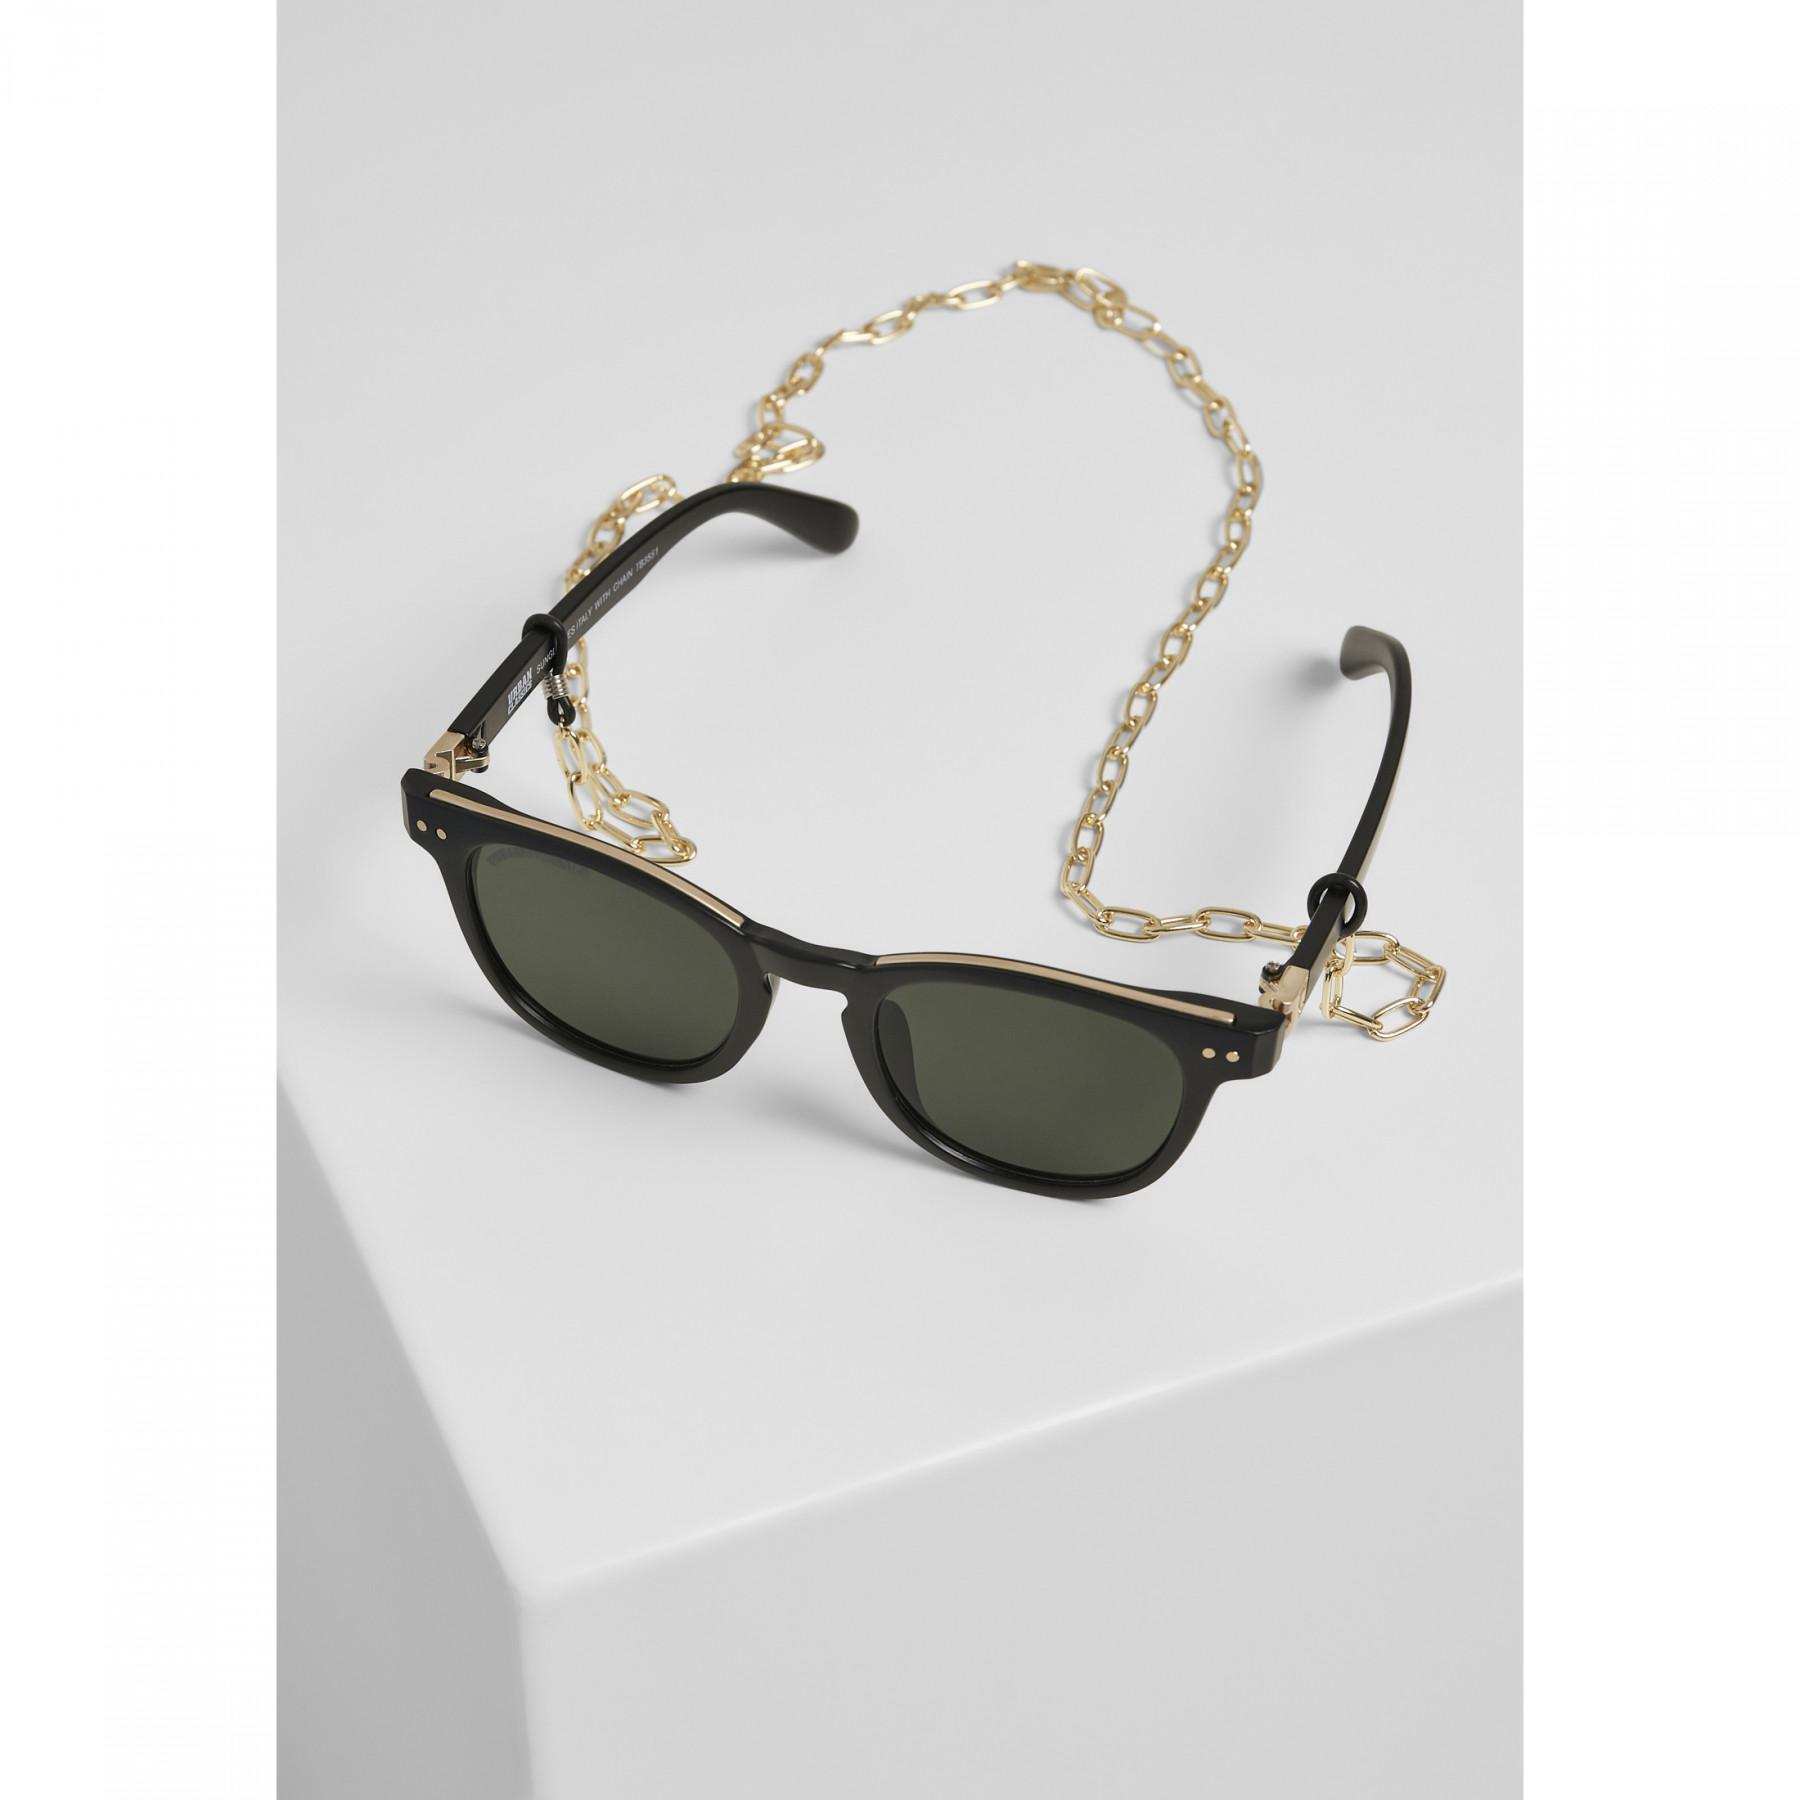 Urban Classic italy with chain sunglasses